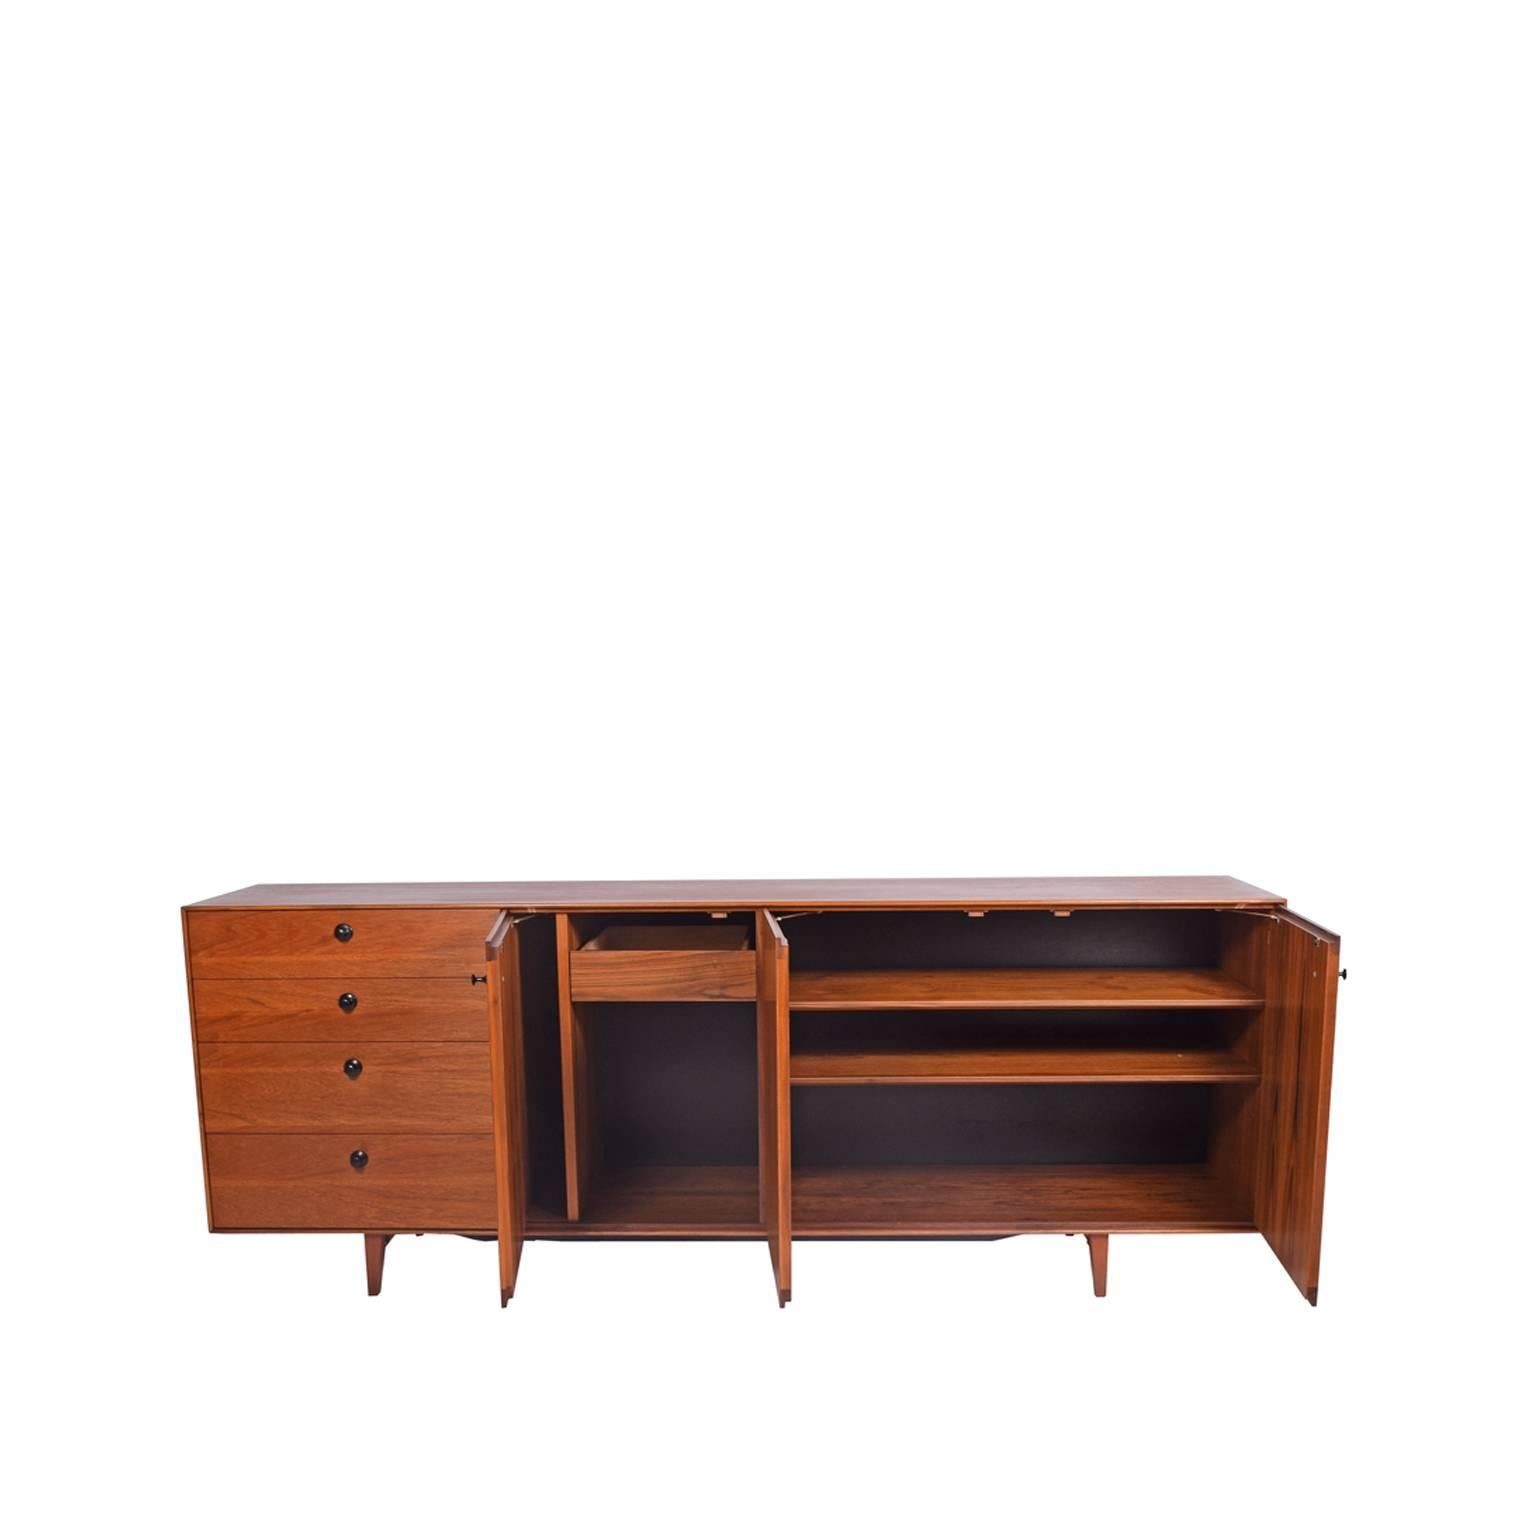 Cabinet features four drawers and three doors concealing two adjustable shelves, one drawer and open storage on solid teak legs with black pulls.